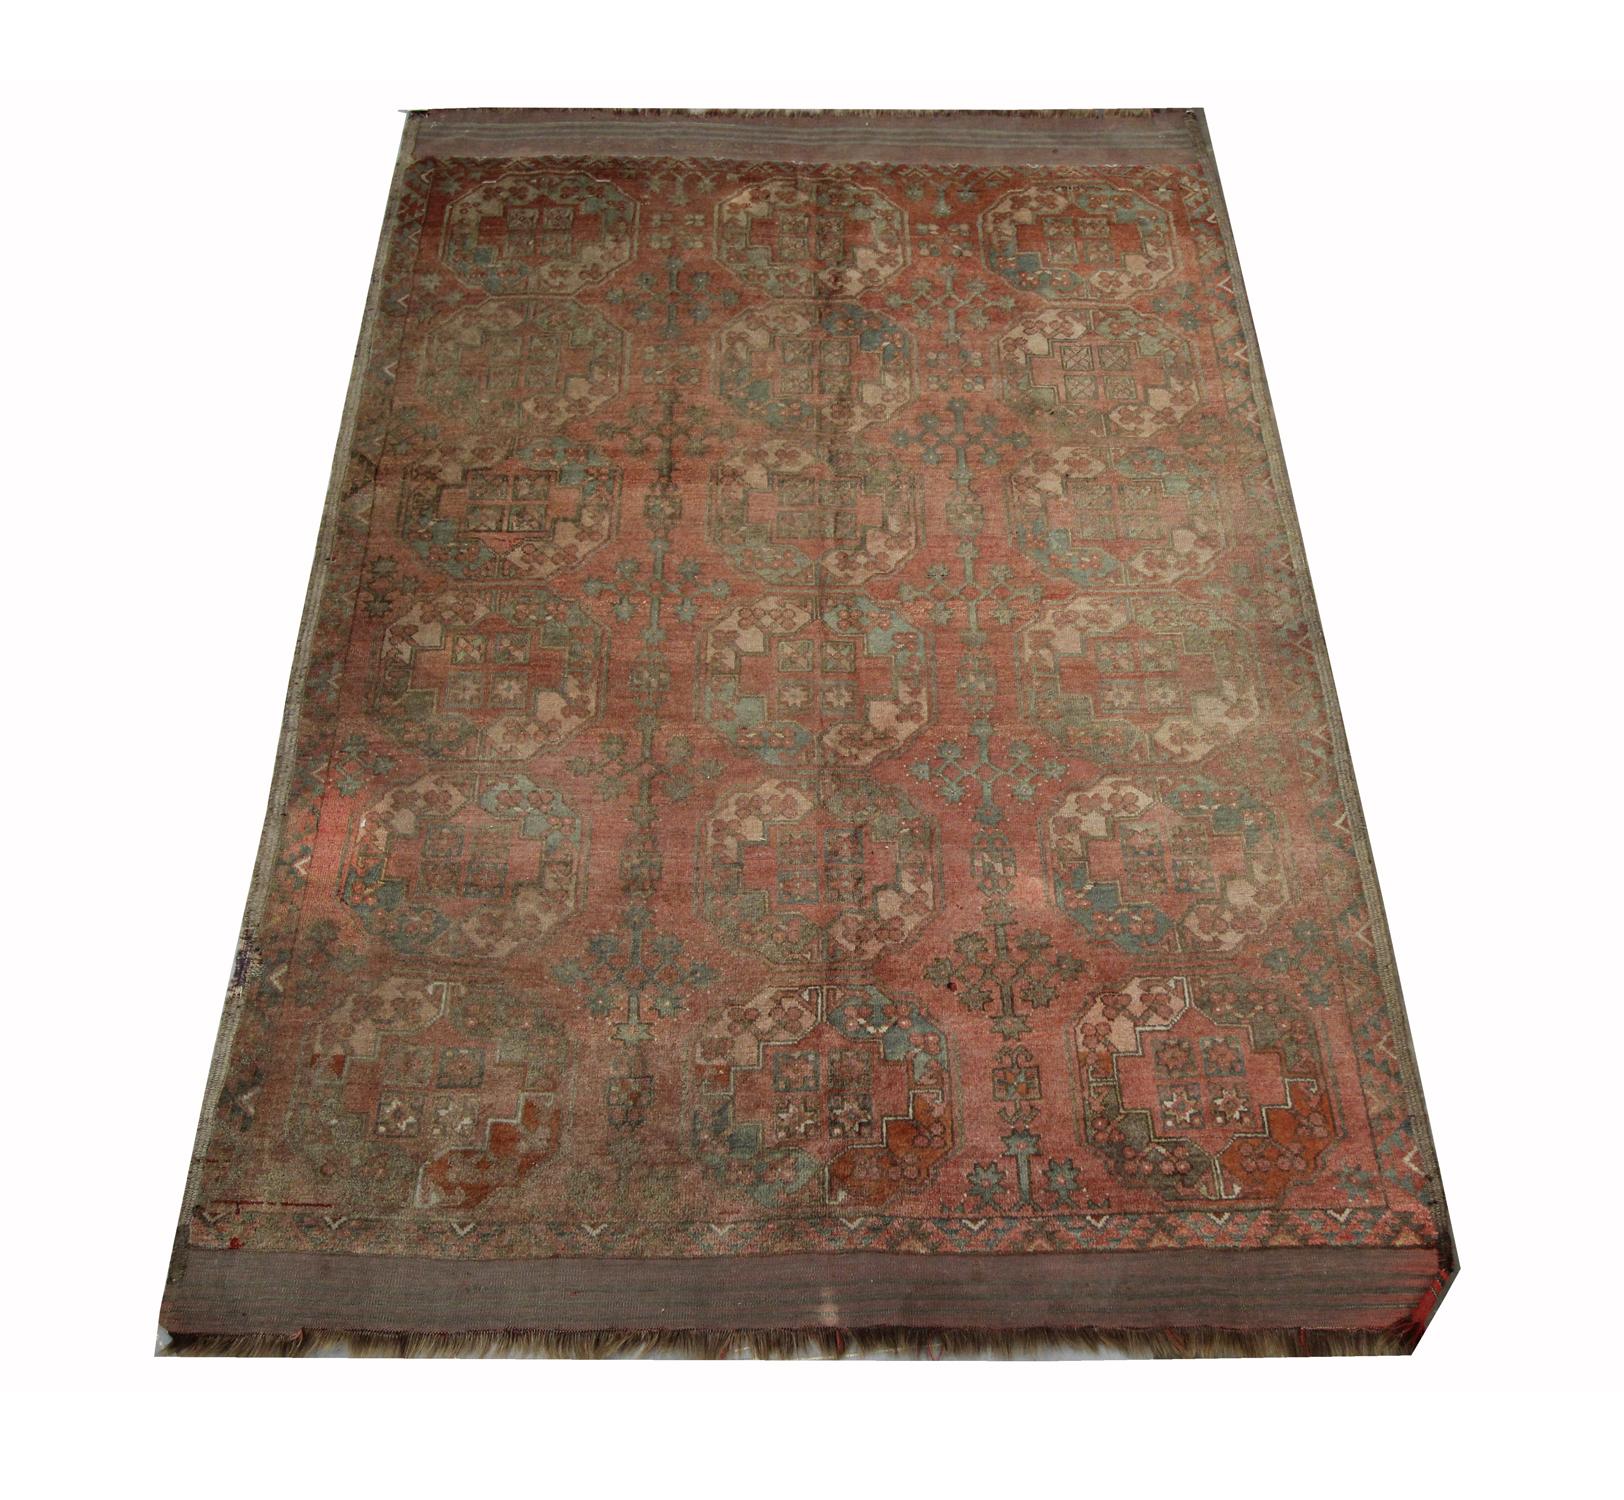 This vintage piece is a Turkmen Ersari rug in the 1940s. The central design features a rust background with a repeating traditional Turkmen medallion pattern that has been woven in accents of green and cream. The intricate designs and patterns woven